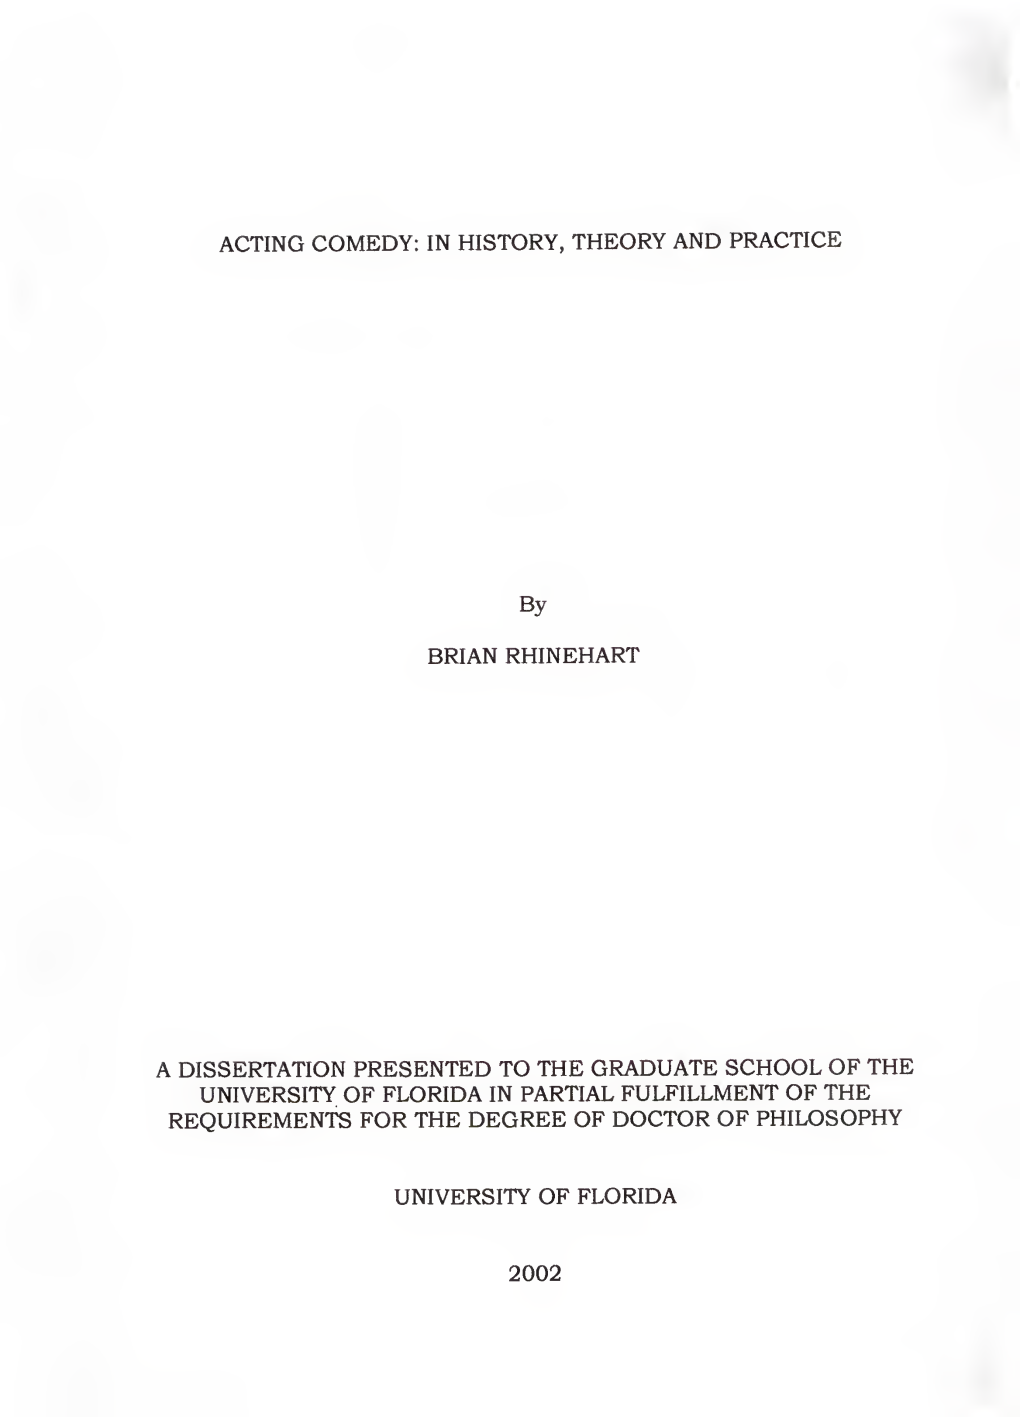 Acting Comedy: in History, Theory and Practice